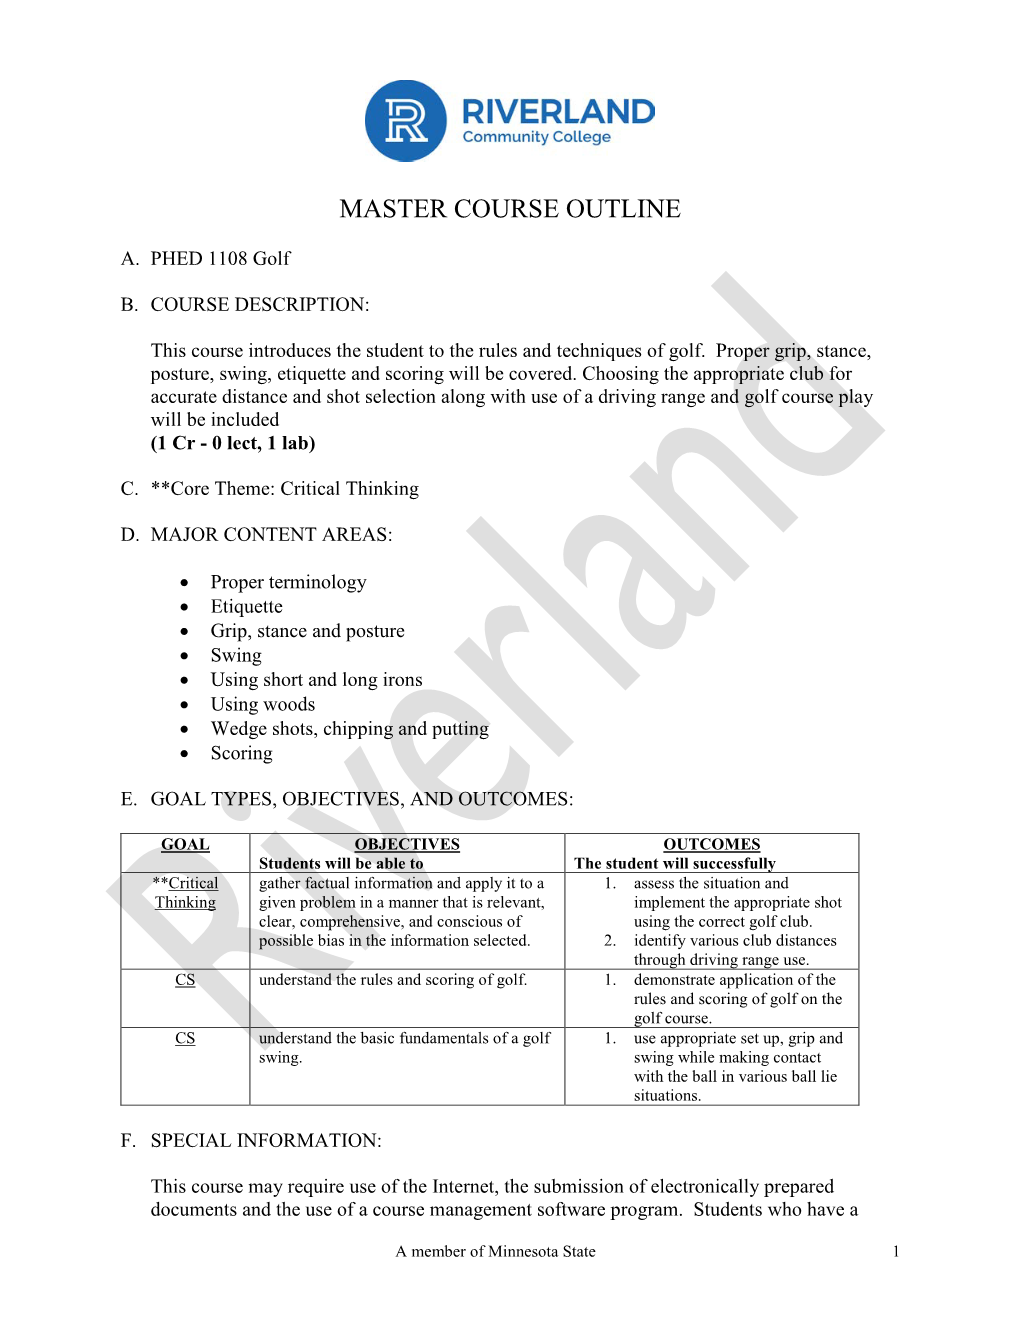 Master Course Outline